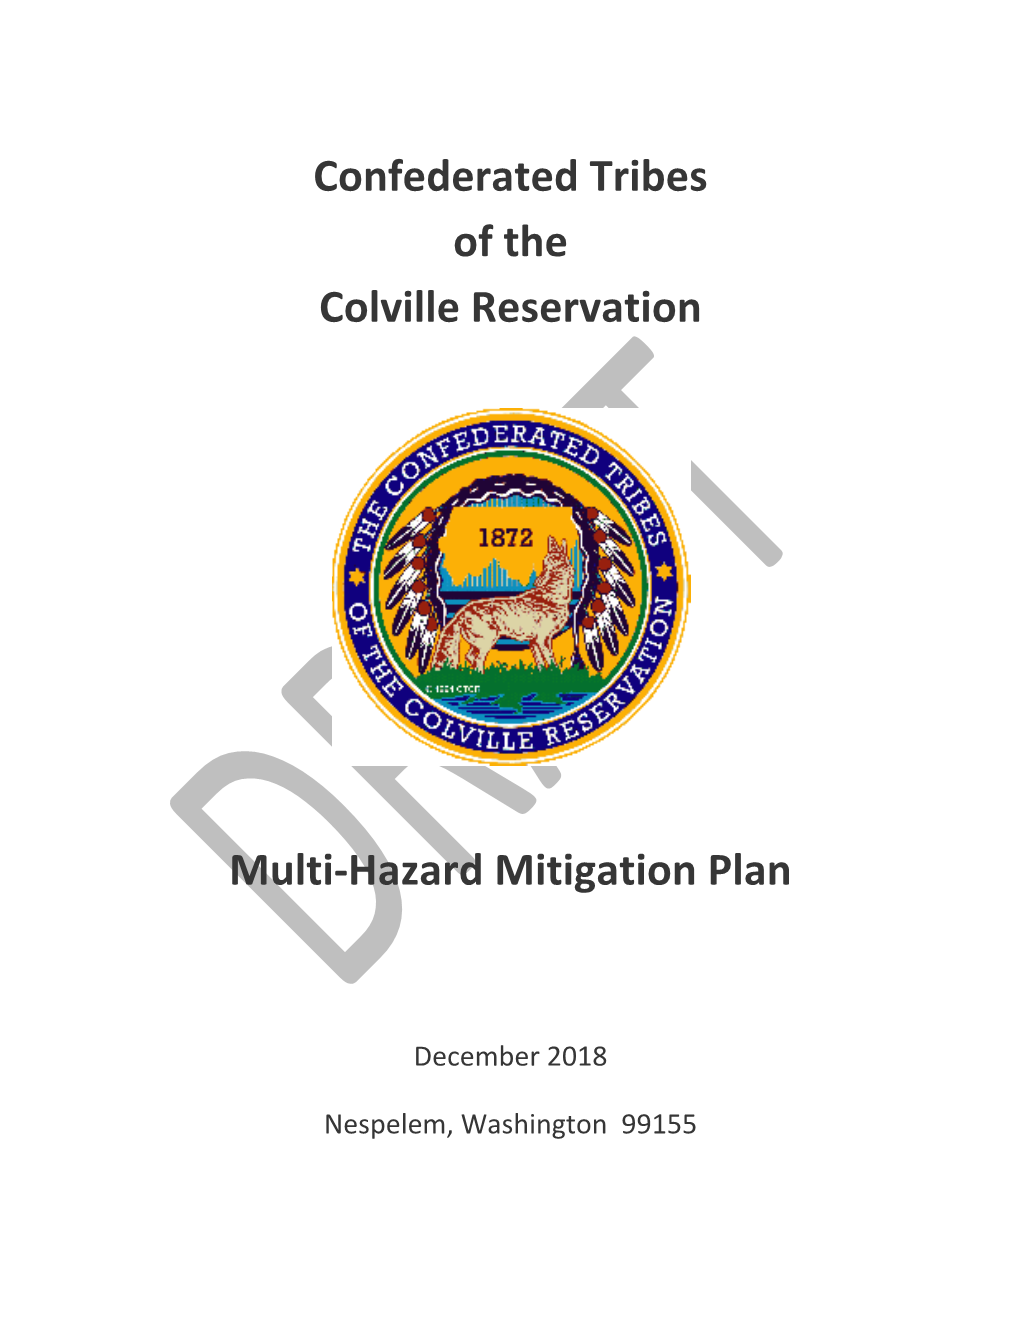 Confederated Tribes of the Colville Reservation Multi-Hazard Mitigation